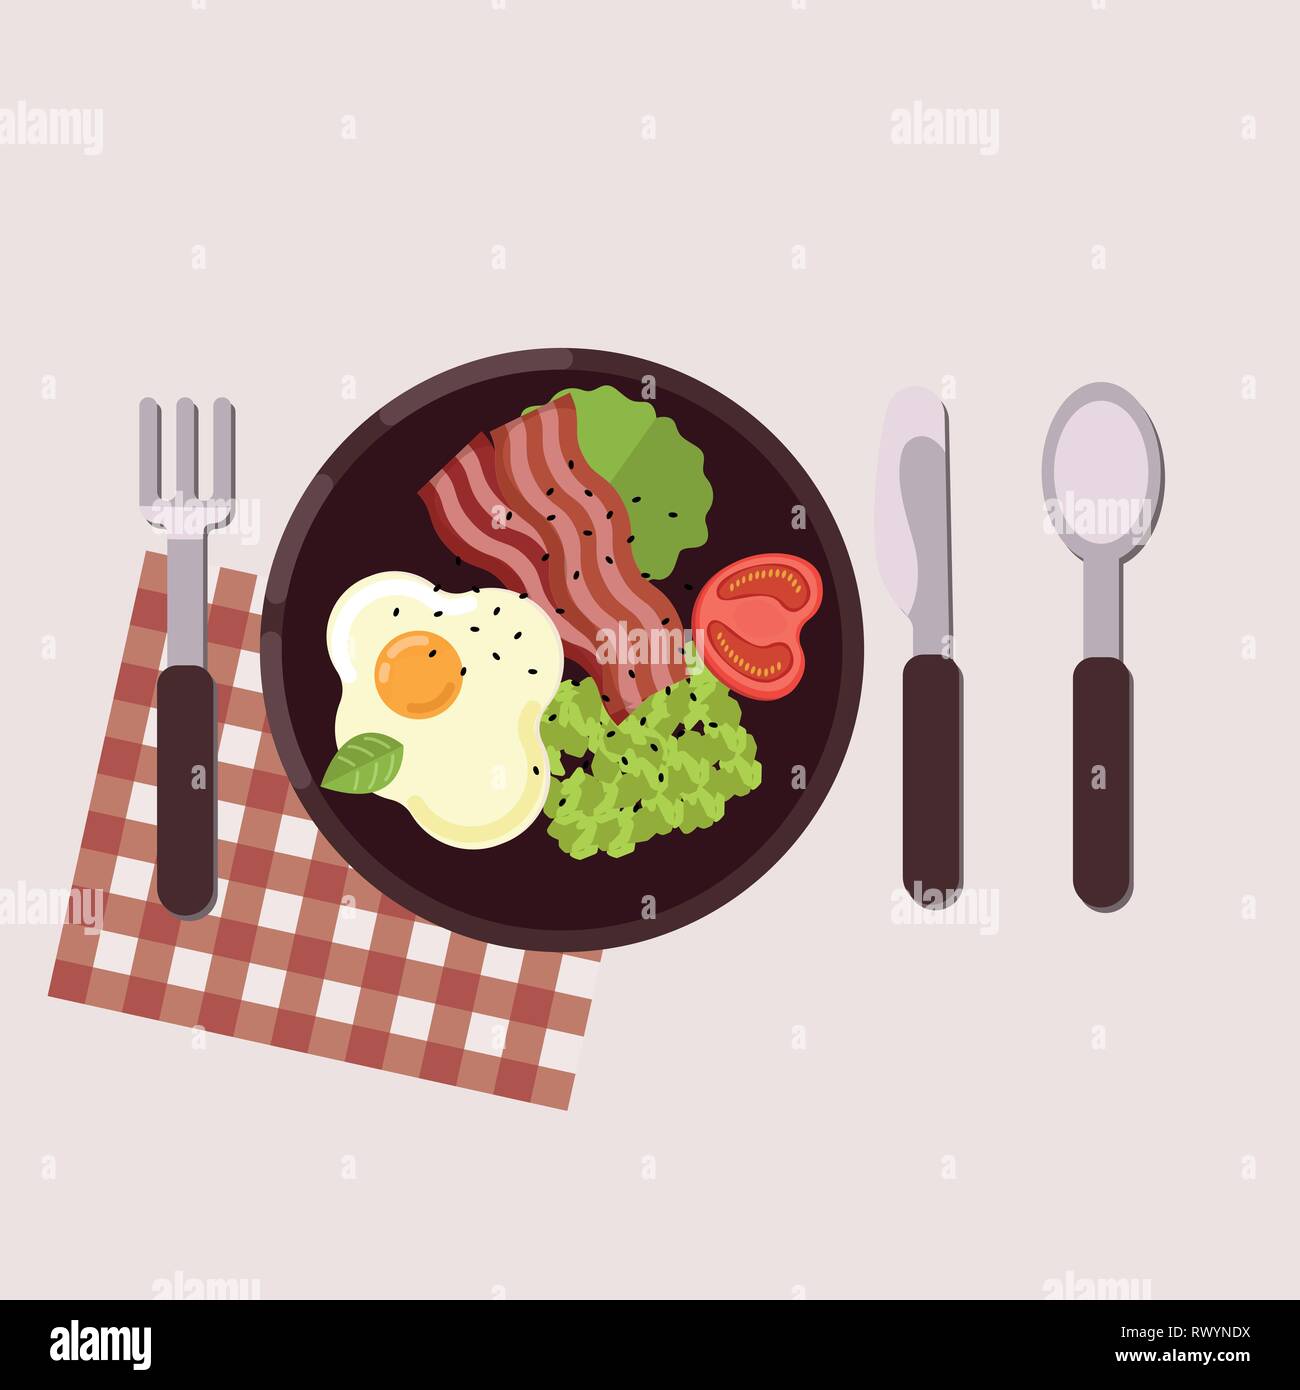 Breakfast concept. Fried egg, avocado paste, tomato and bacon served on a plate with fork, knife, spoon and napkin. Healthy food. Vector illustration. Stock Vector